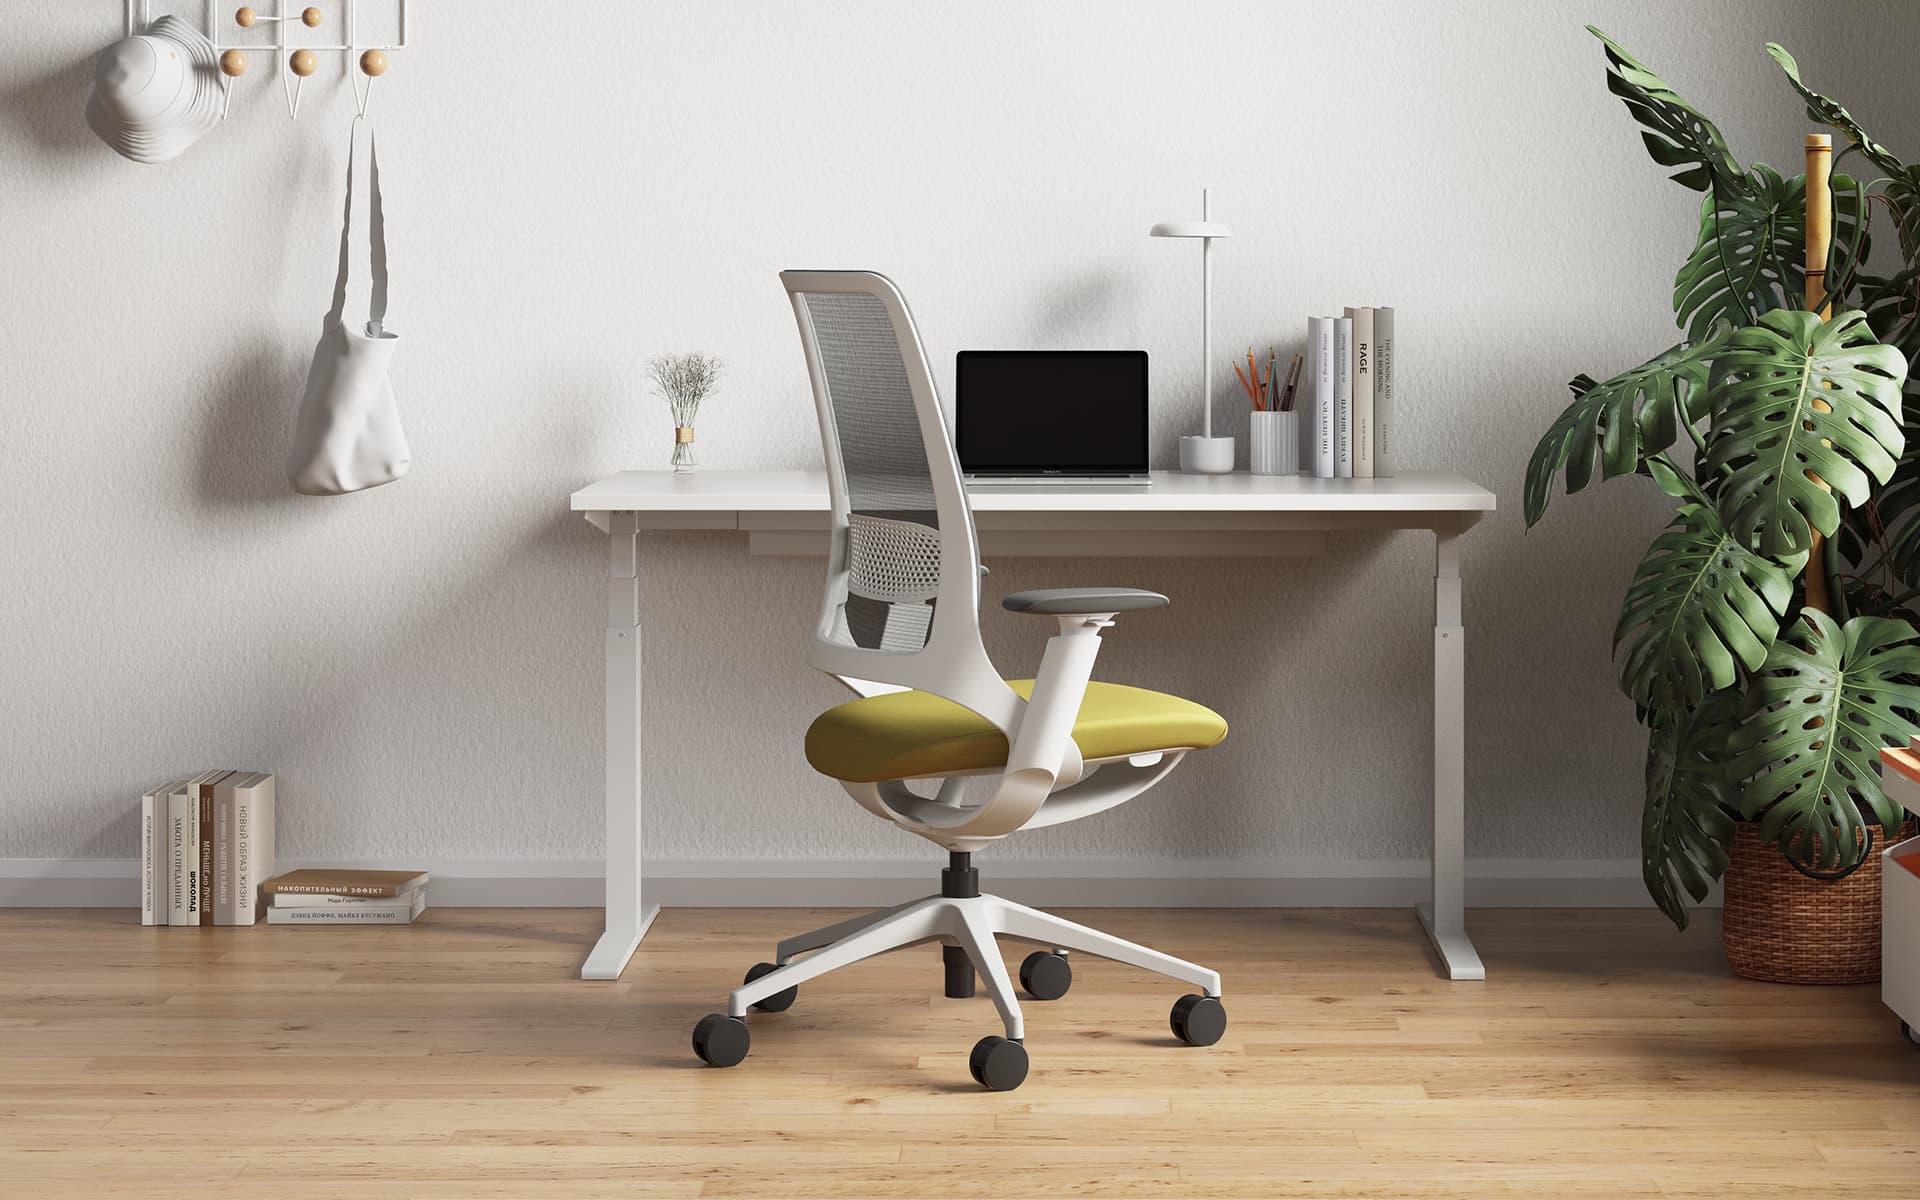 Enova Hug office chair by ITO Design with green seating surface and grey back and rest in a modern home office